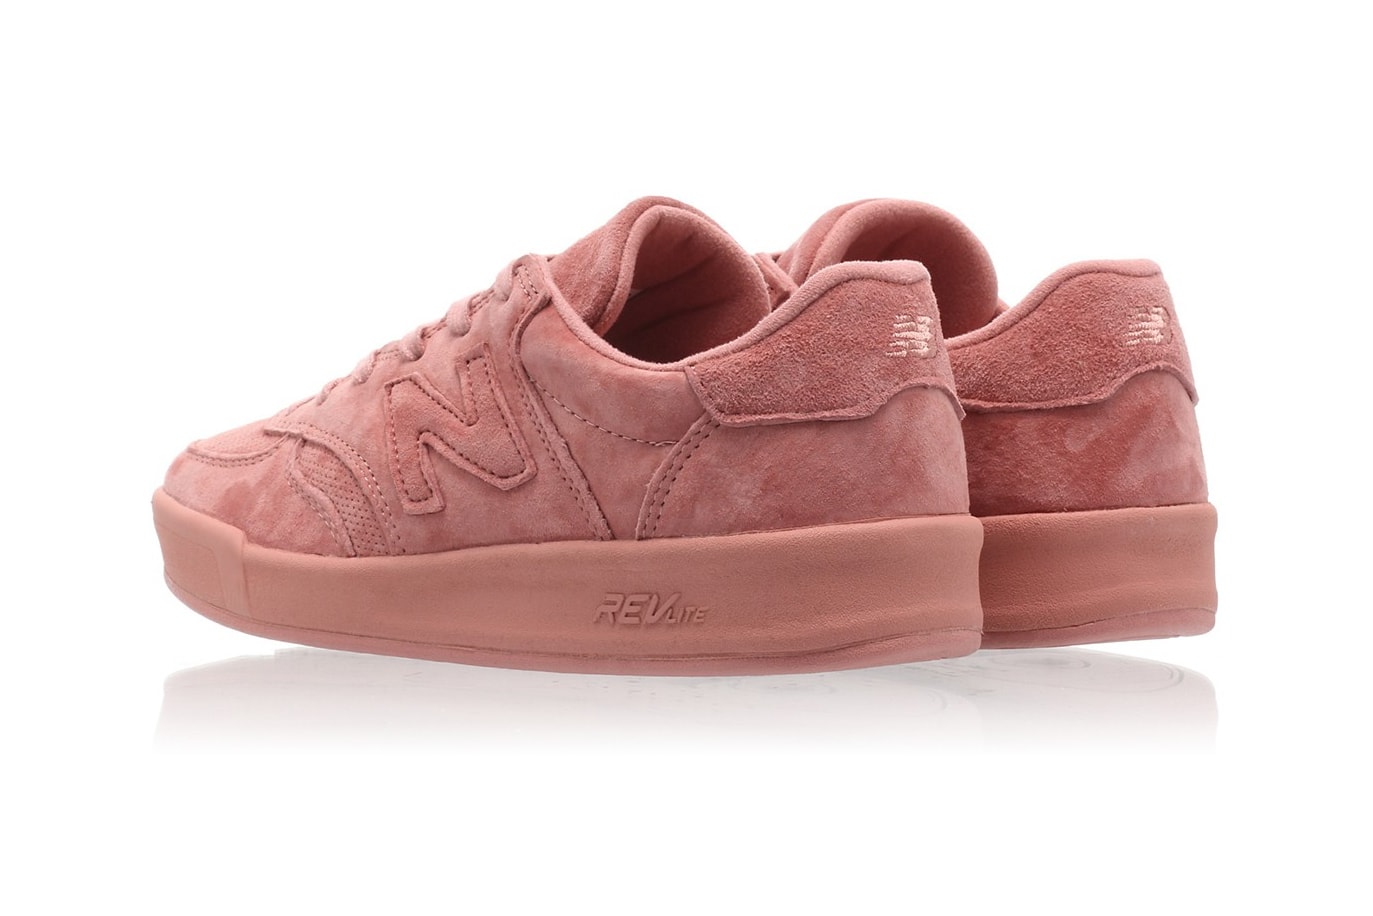 New Balance 300 Sneaker Dusted Peach Pink Rose Women